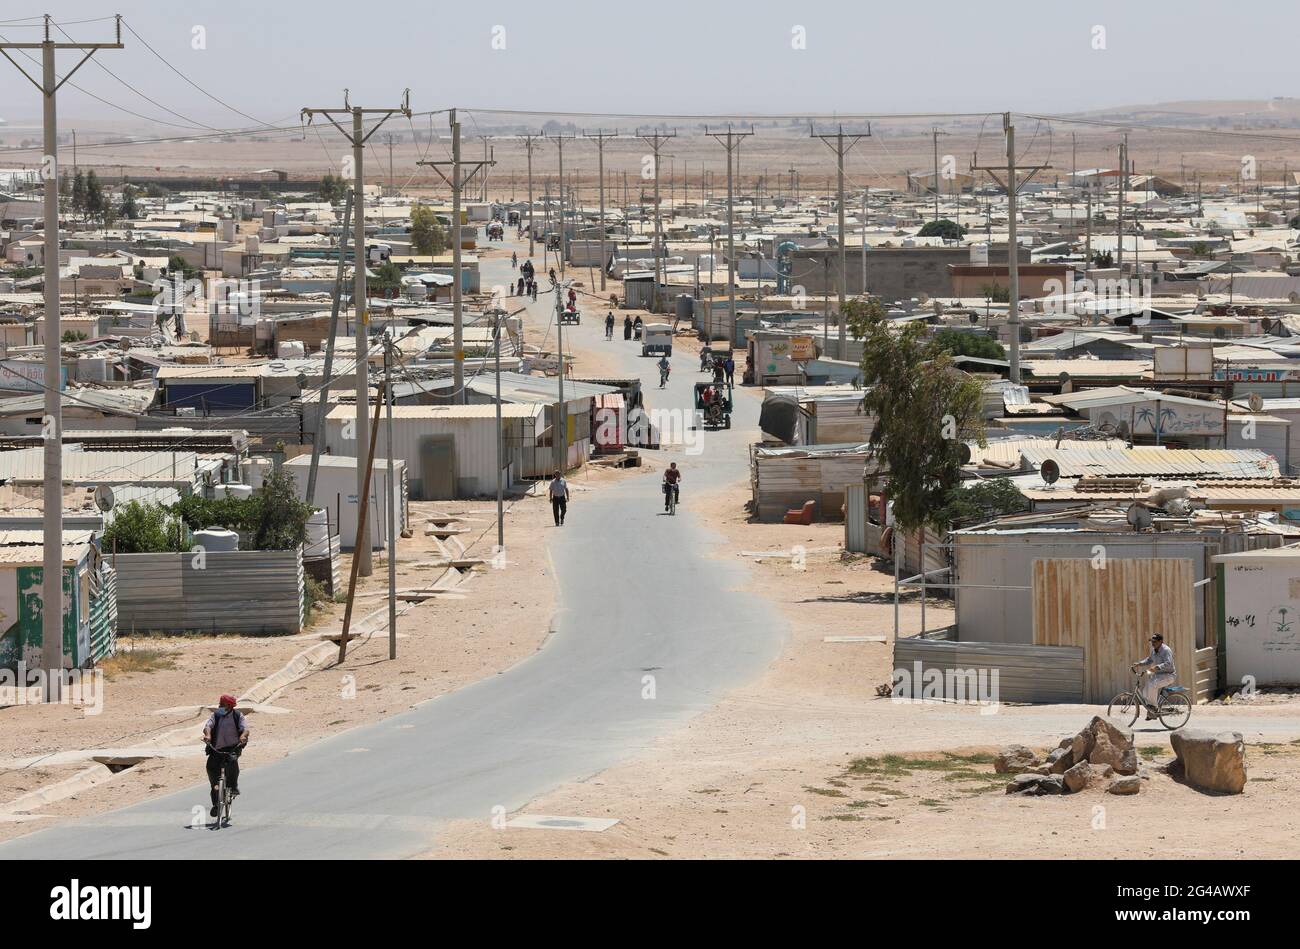 Syrian refugees are seen at the Zaatari refugee camp in the Jordanian city  of Mafraq, near the border with Syria, Jordan June 17, 2021. Picture taken  June 17, 2021. REUTERS/Alaa Al Sukhni